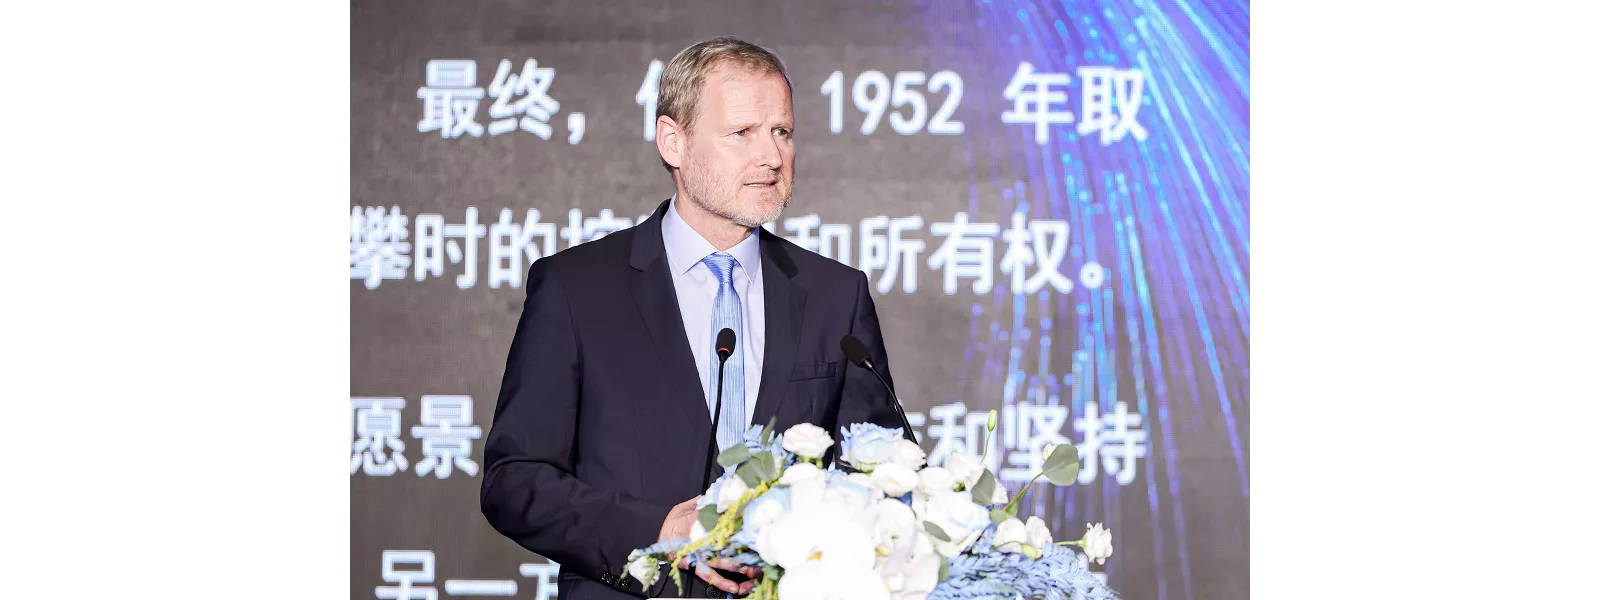 Andreas Feichtinger about the 10th anniversary of Plansee China